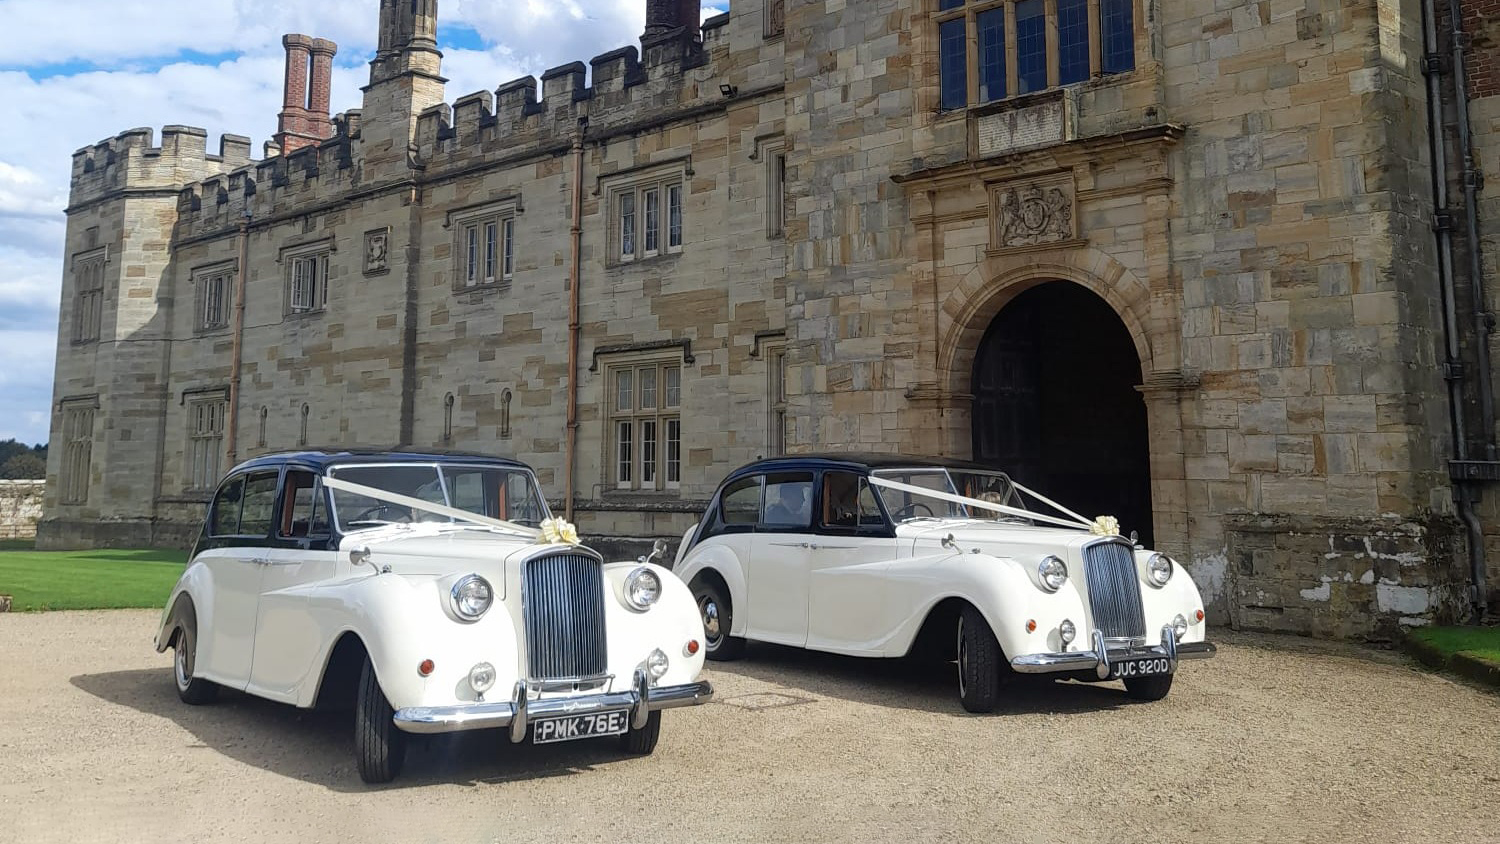 Two Classic Austin Princess Limousine decorated with Ivory Ribbons and Bows on top of the front grill. Vehicles are parked in front of a large manor house in Canterbury